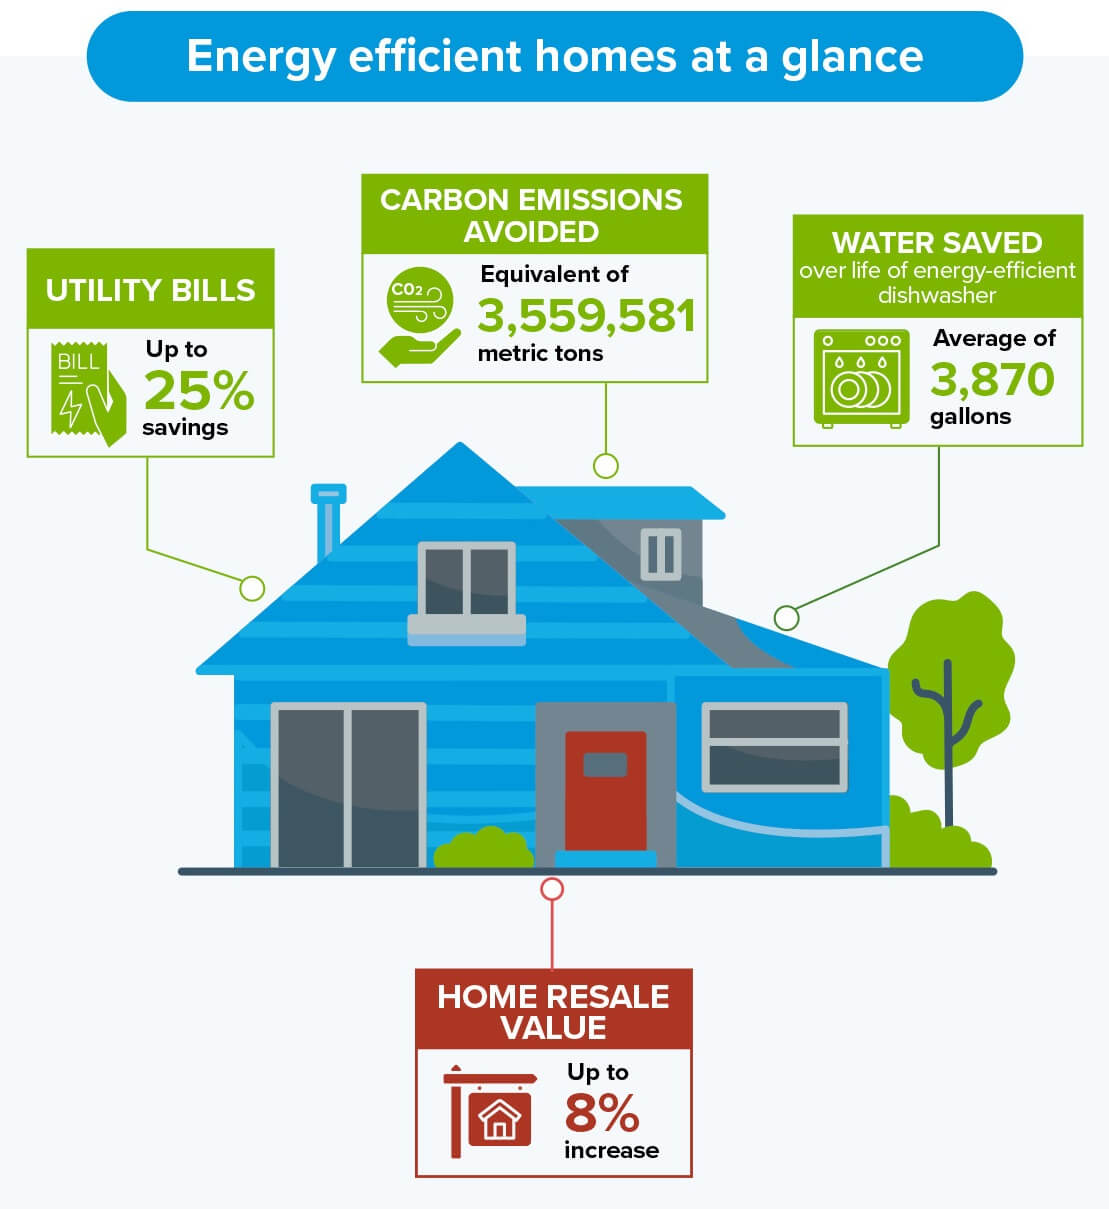 Energy efficient homes at a glance